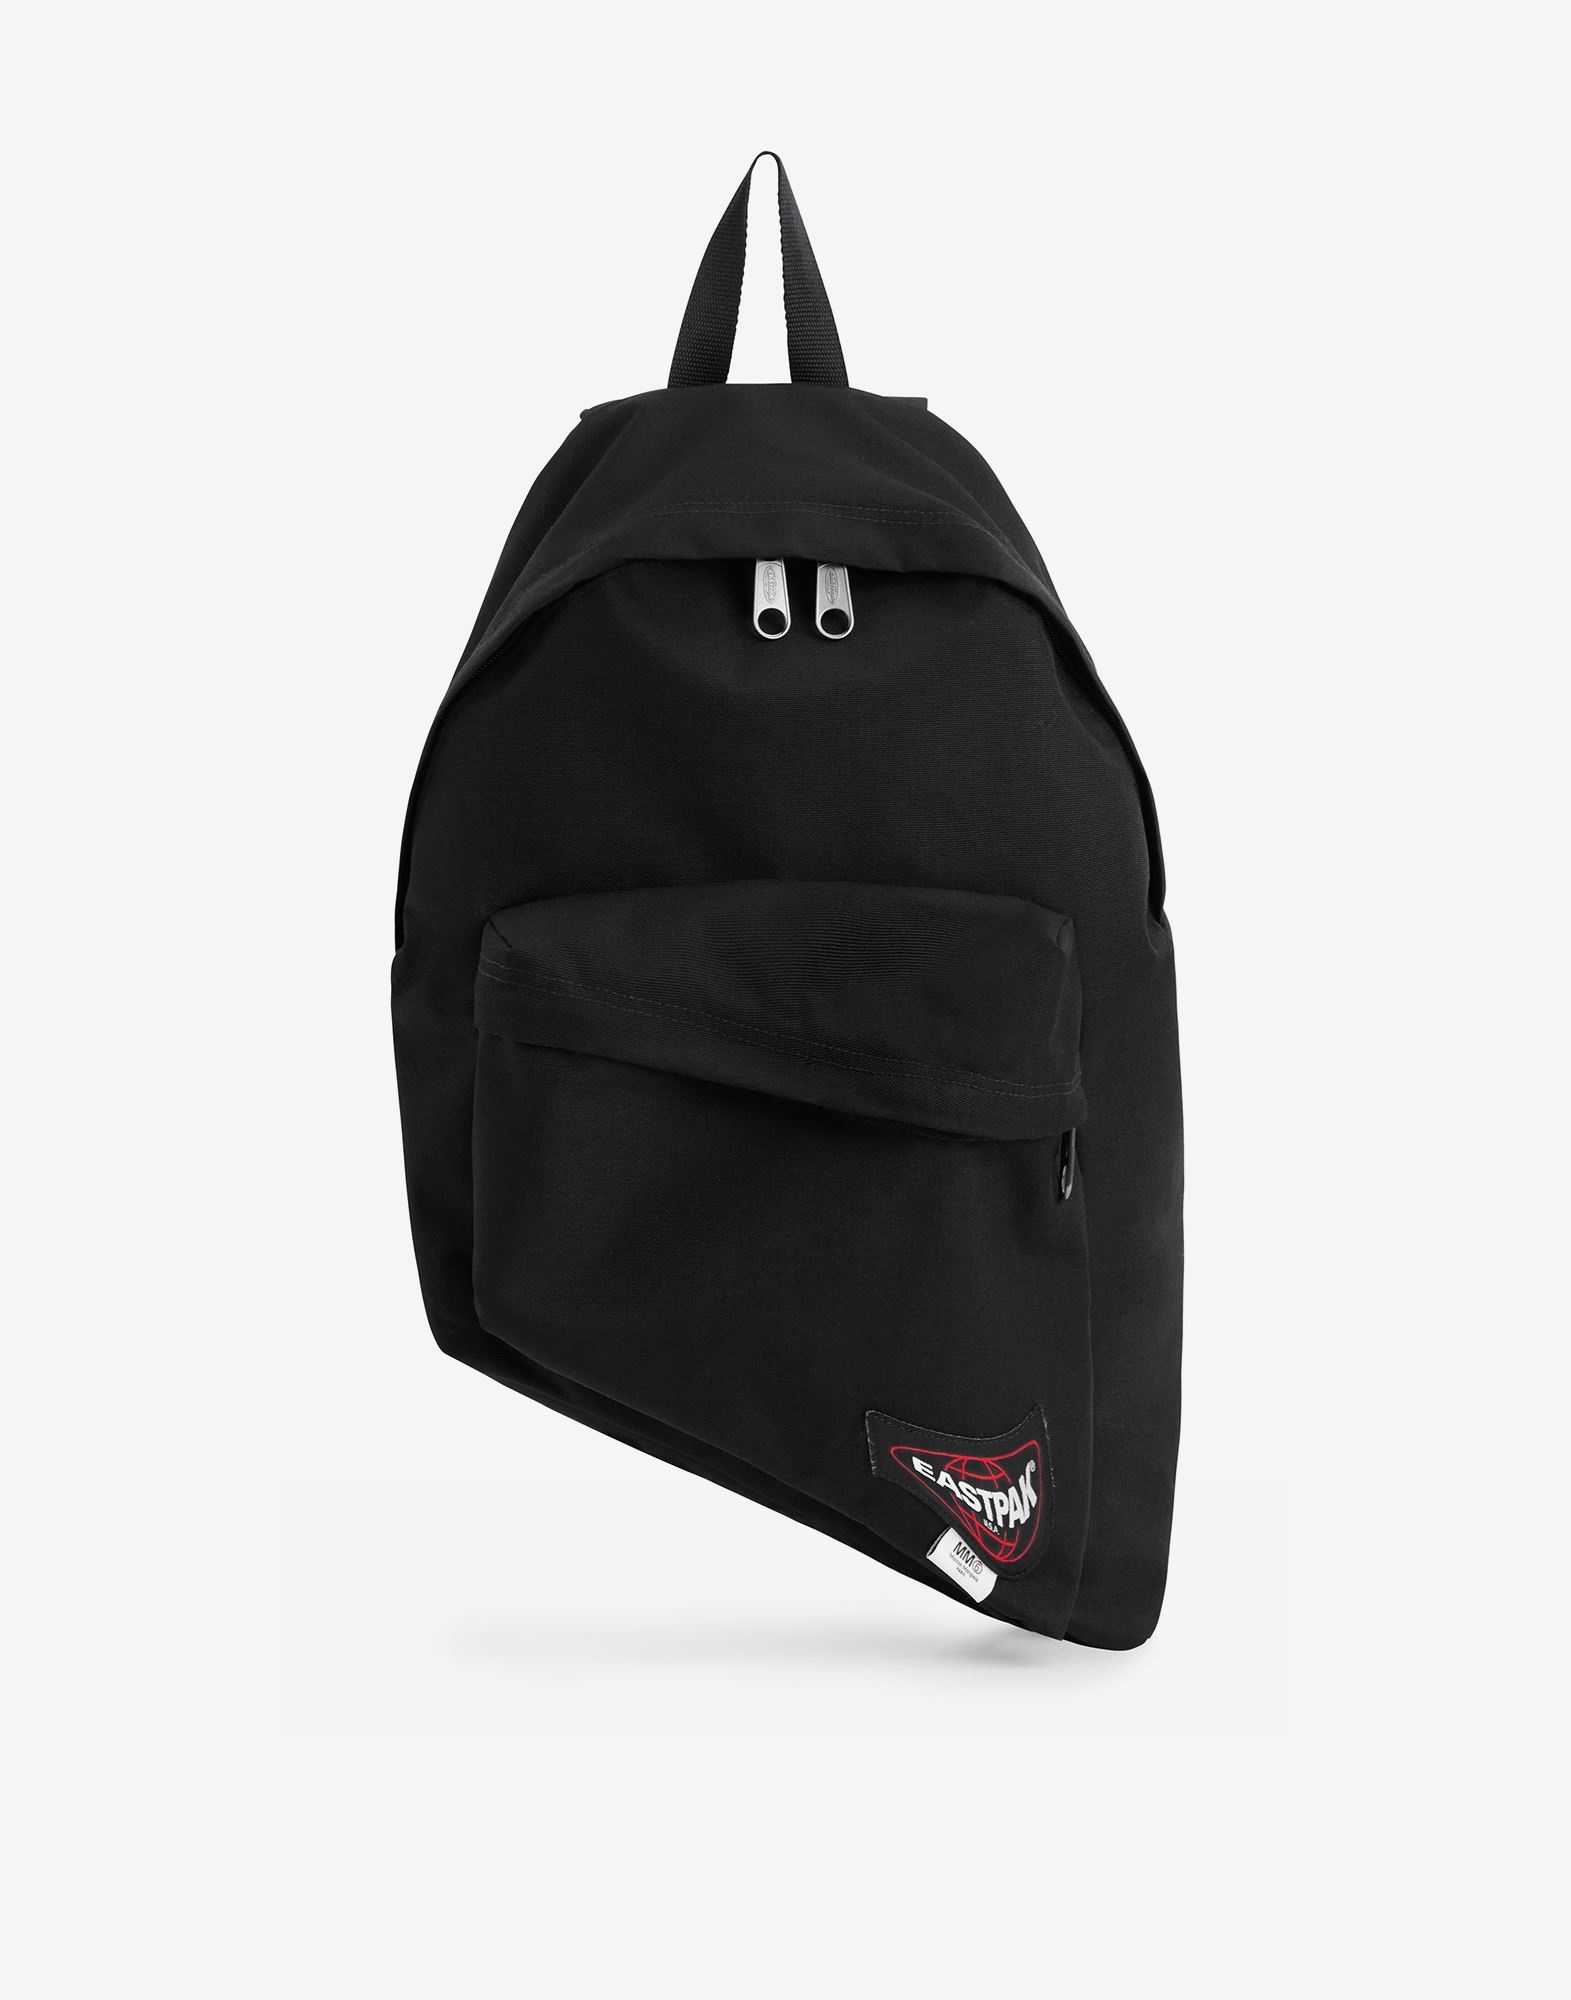 MM6 x Eastpak
Dripping Backpack - 1